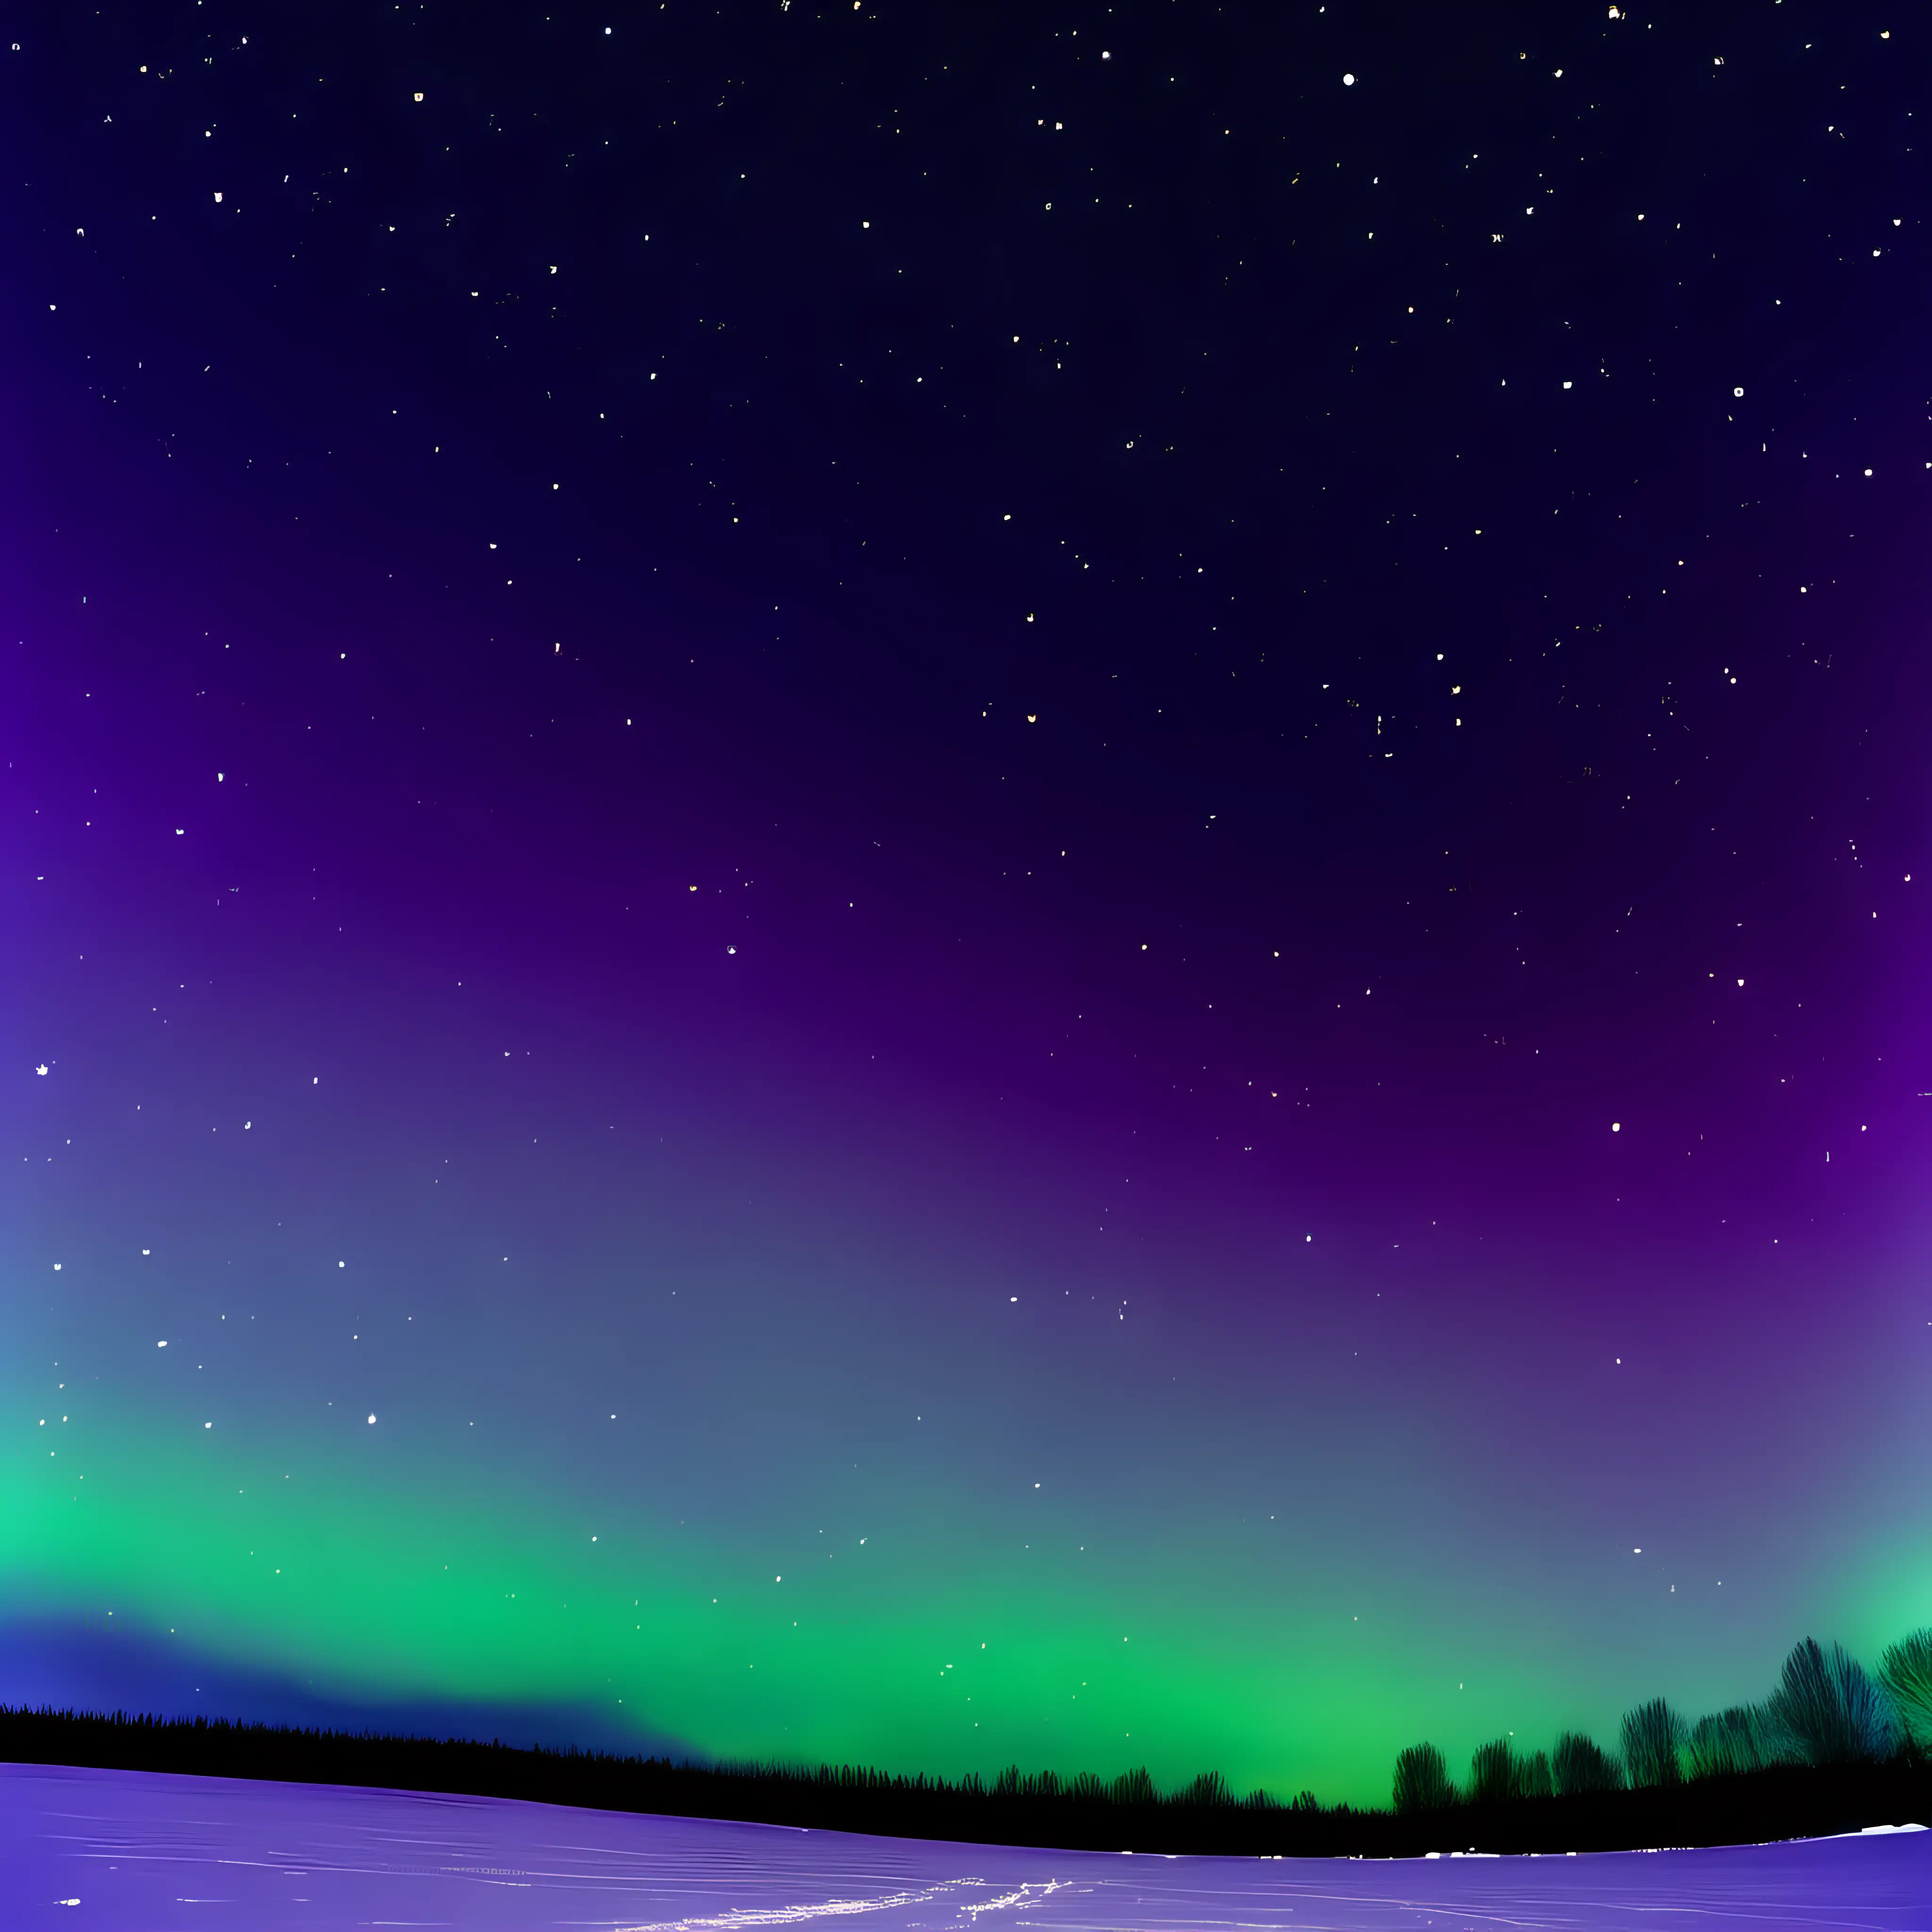 Vibrant Northern Lights Majestic Skies of Purples Greens and Whites